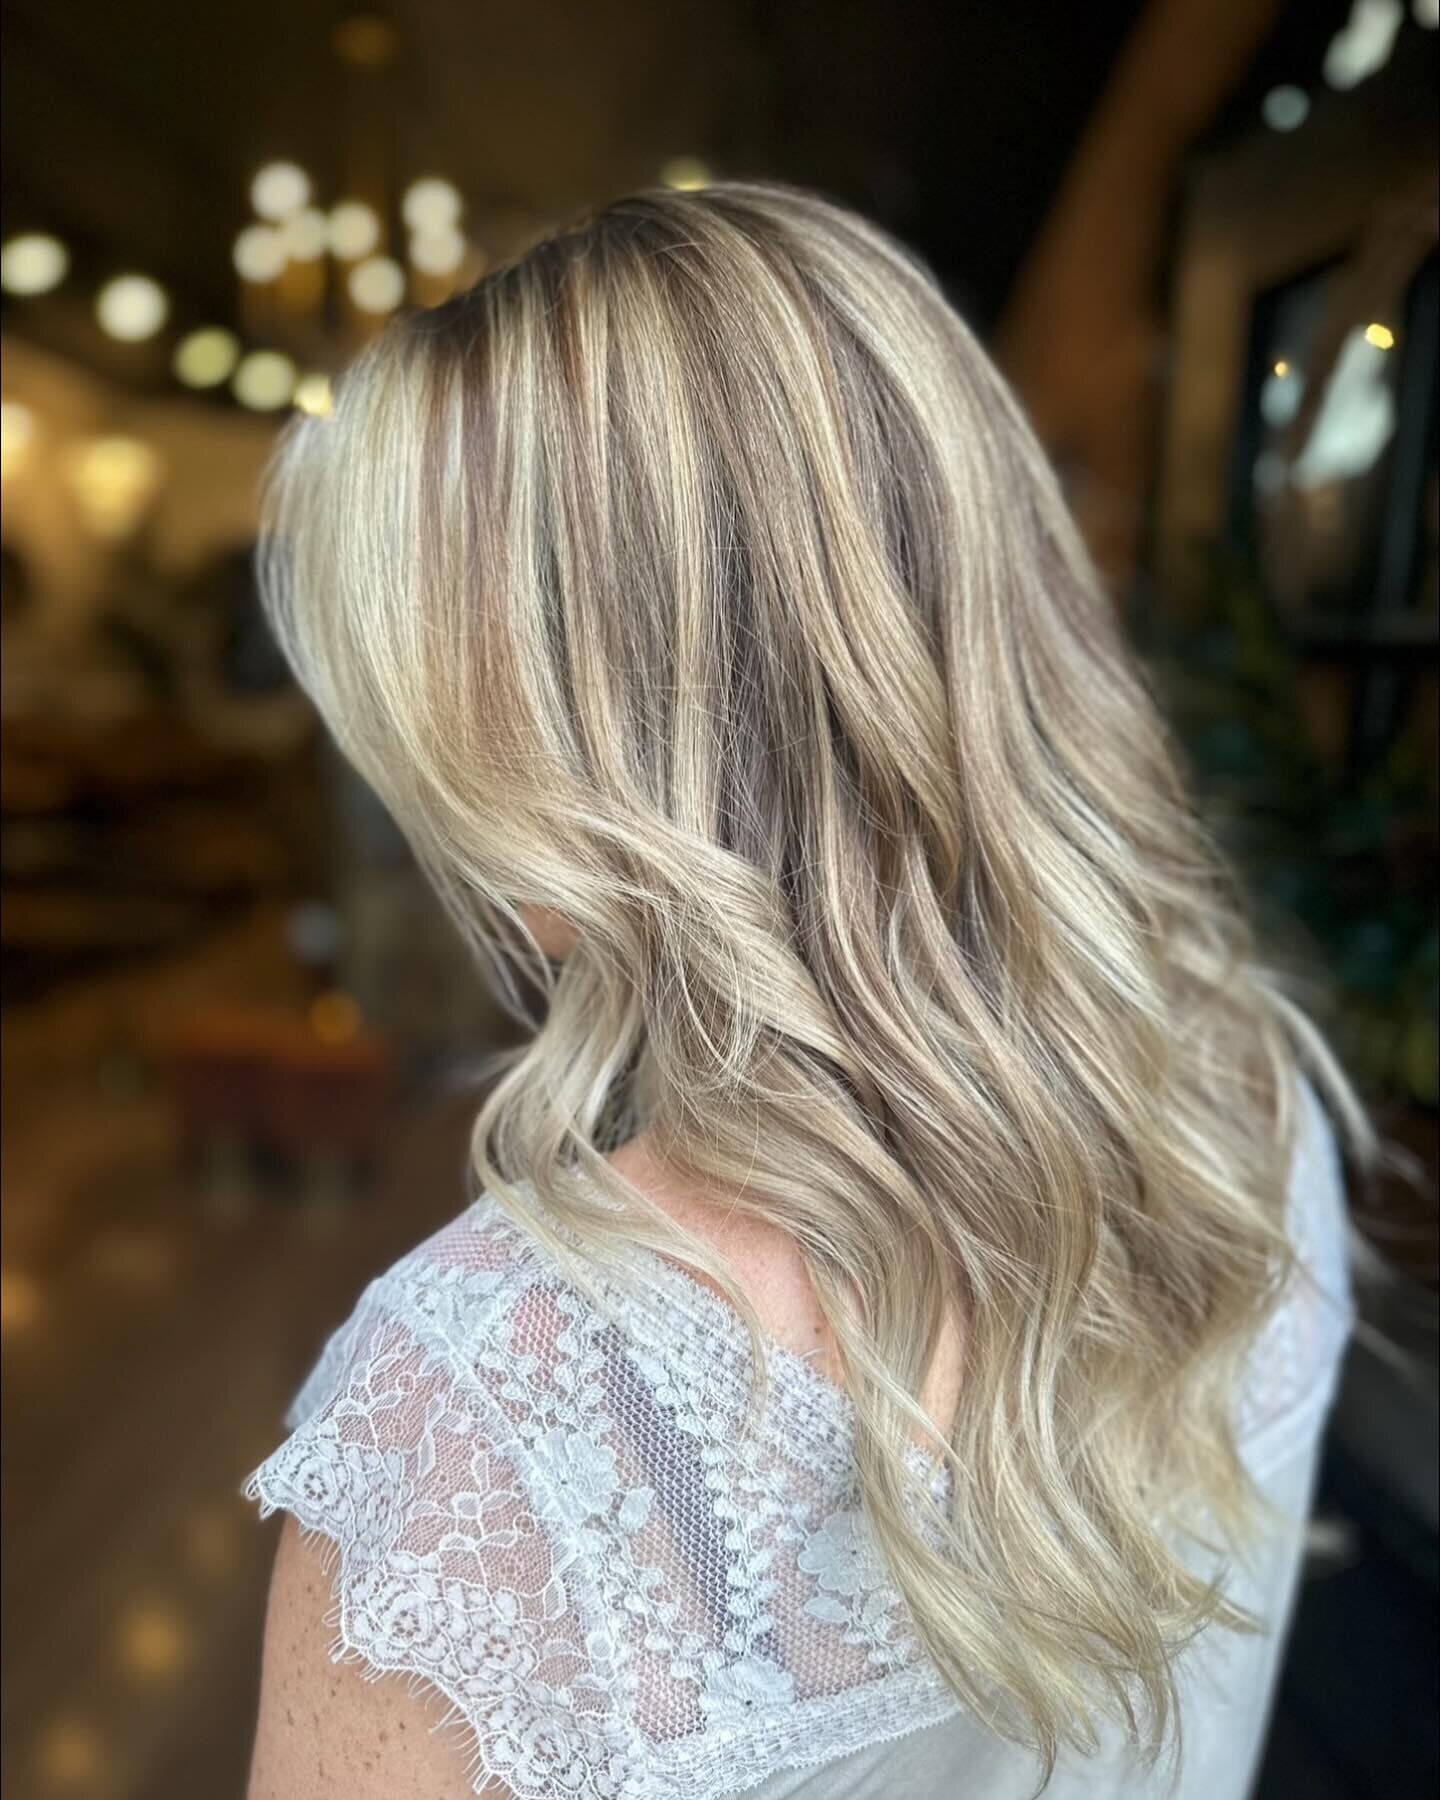 Golden moments and sun-kissed strands &ndash; embracing the beauty of a flawless blonde balayage. ✨🌼 Hair by: @tayler_latuabella  #BlondeAmbition #BalayageBeauty